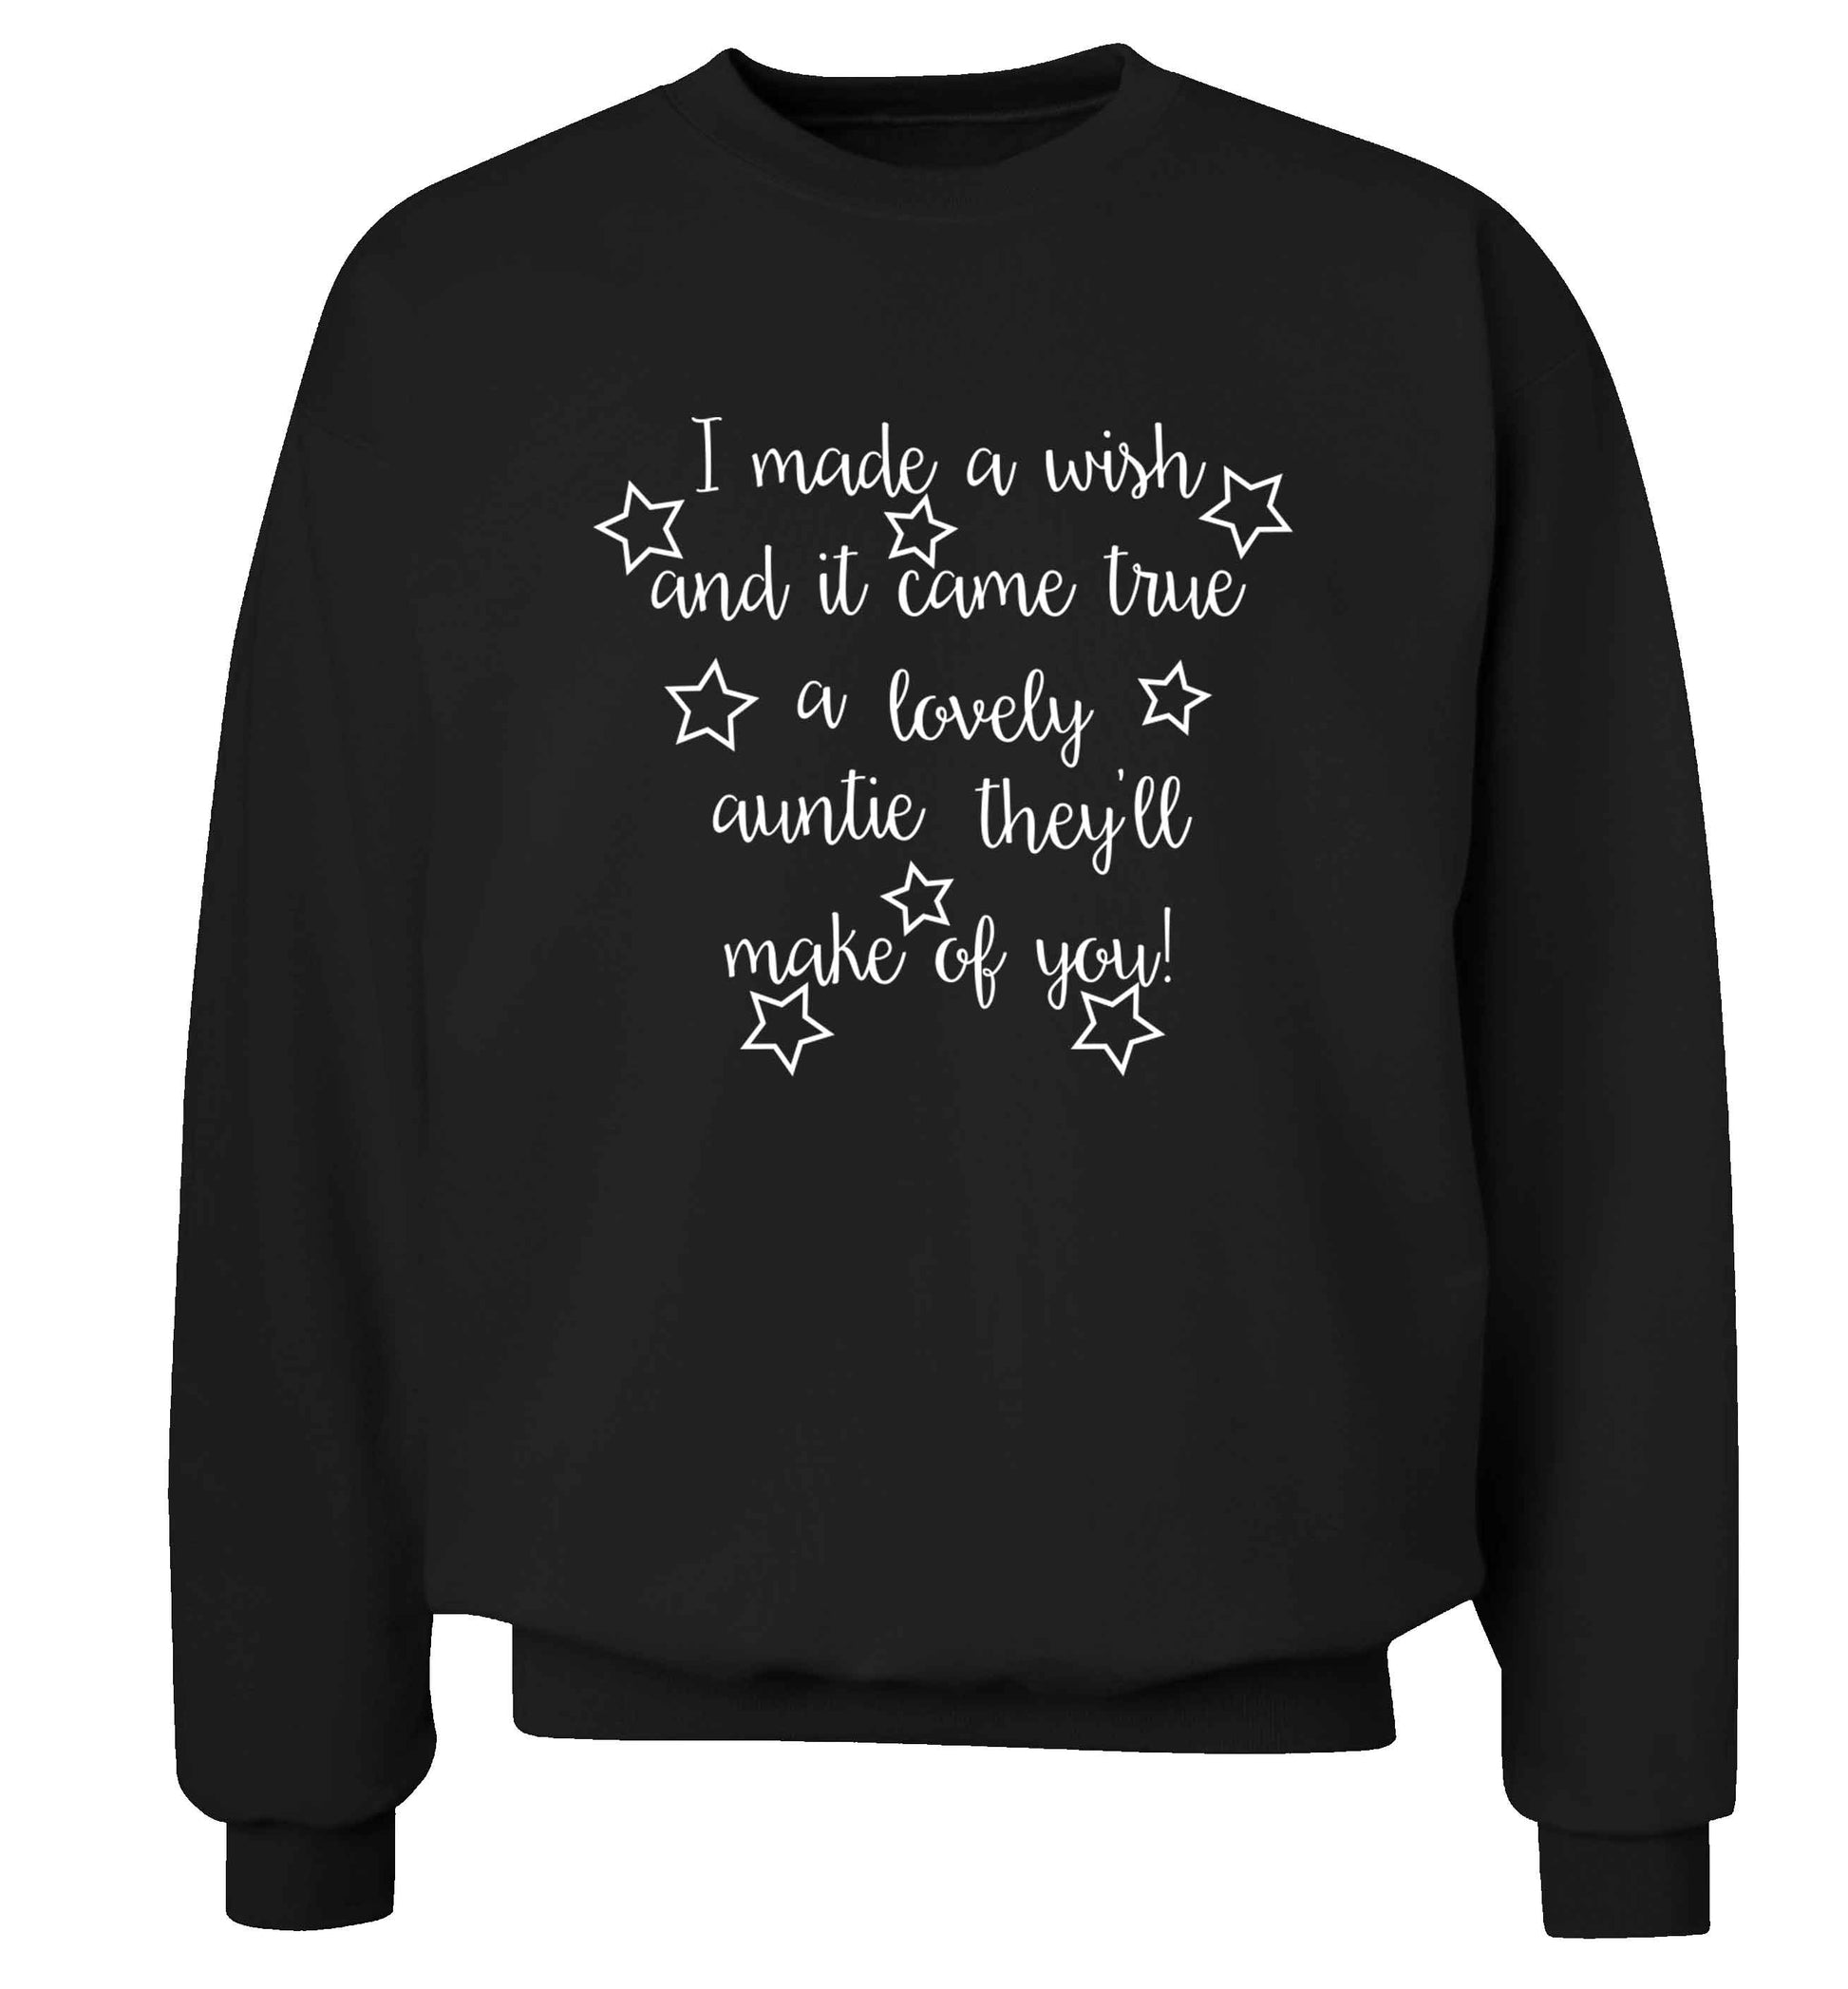 I made a wish and it came true a lovely auntie they'll make of you! Adult's unisex black Sweater 2XL